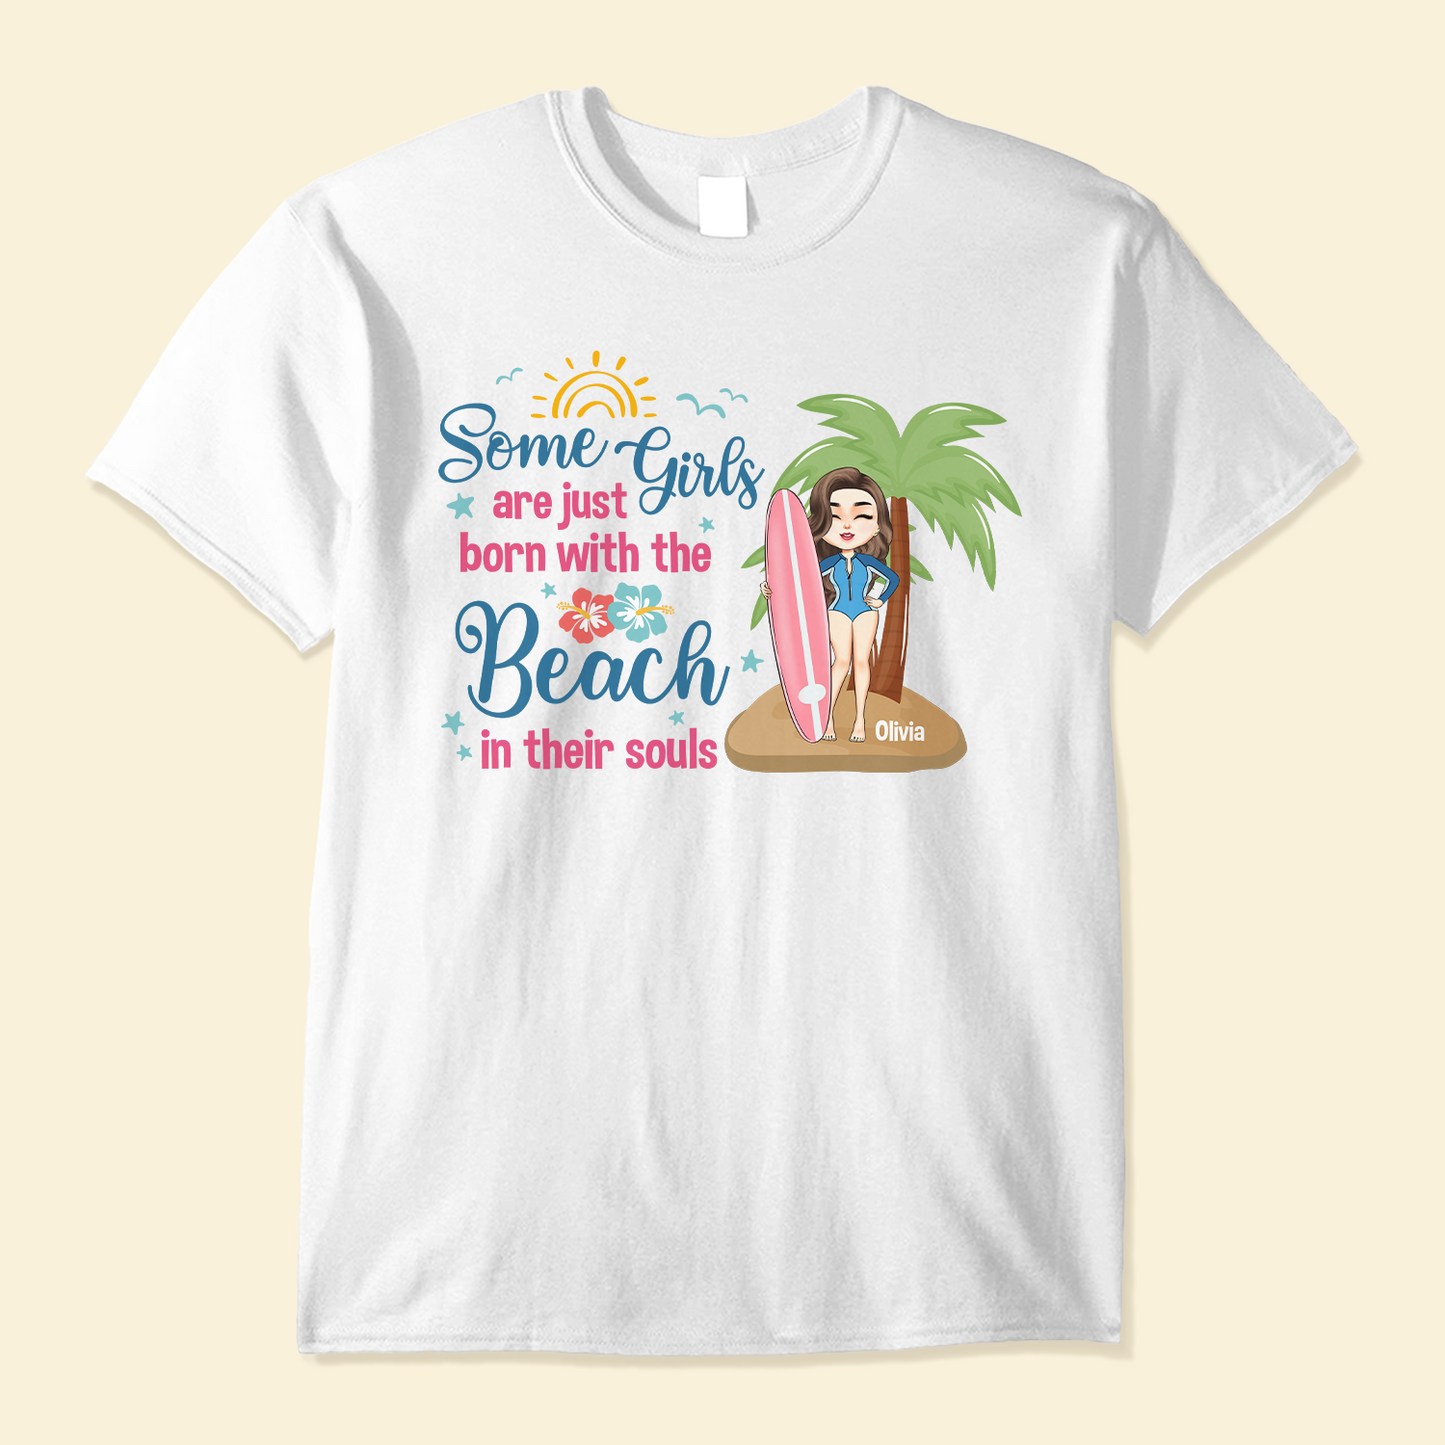 Some Girls Are Just Born With The Beach In Their Souls - Personalized Shirt - Summer, Birthday Gift For Surfing Lovers, Surfers, Girl Friends